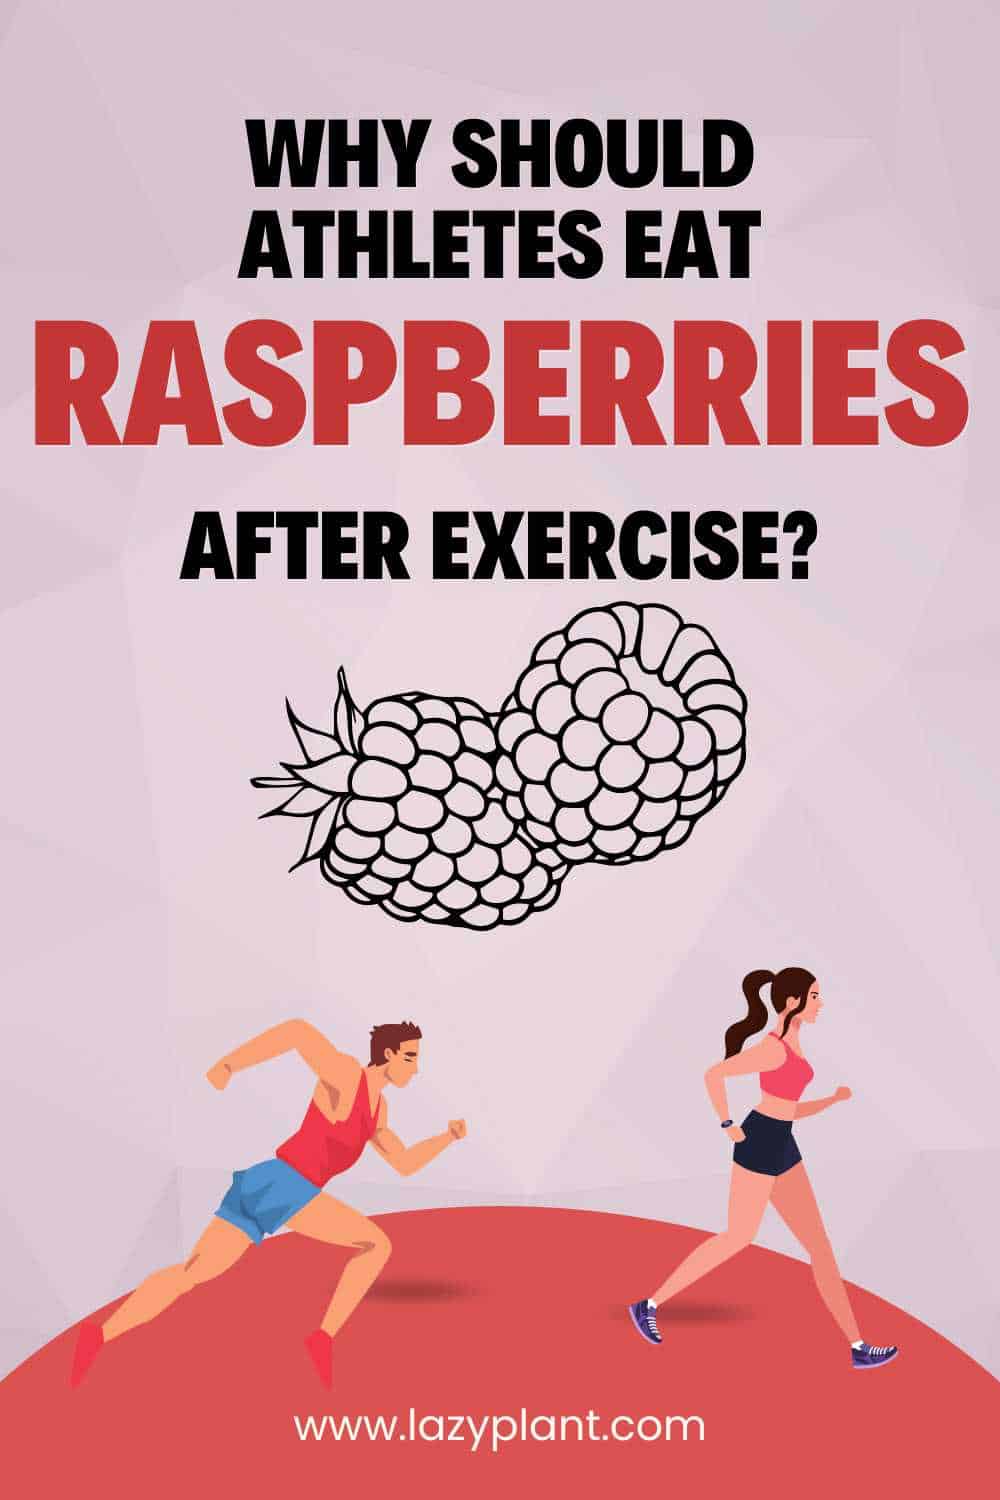 How to eat raspberries for athletic performance & muscle growth?